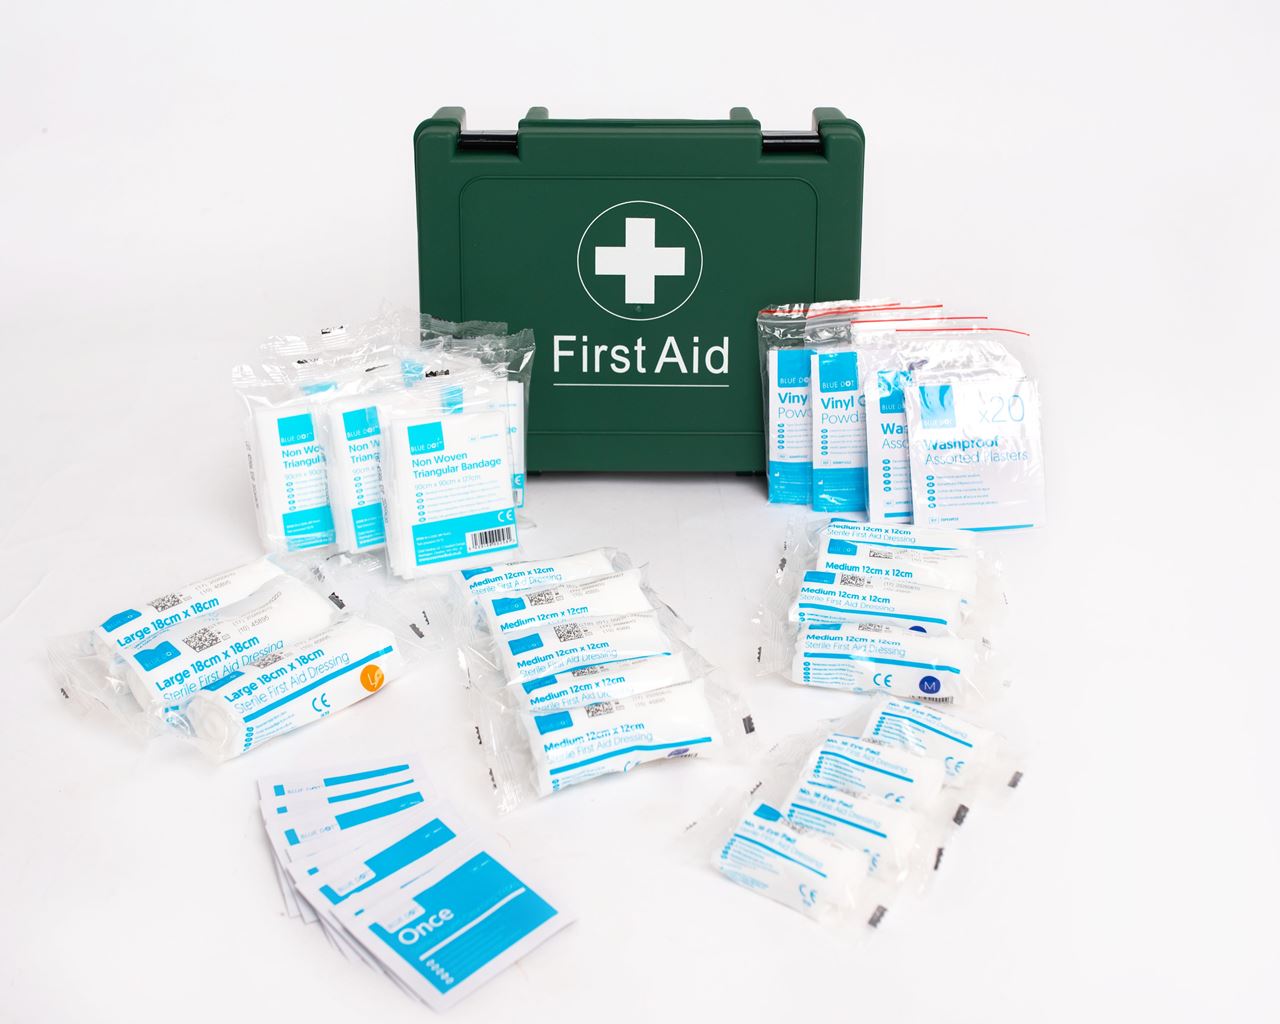 Picture of First Aid Kit (11-20 Person) **